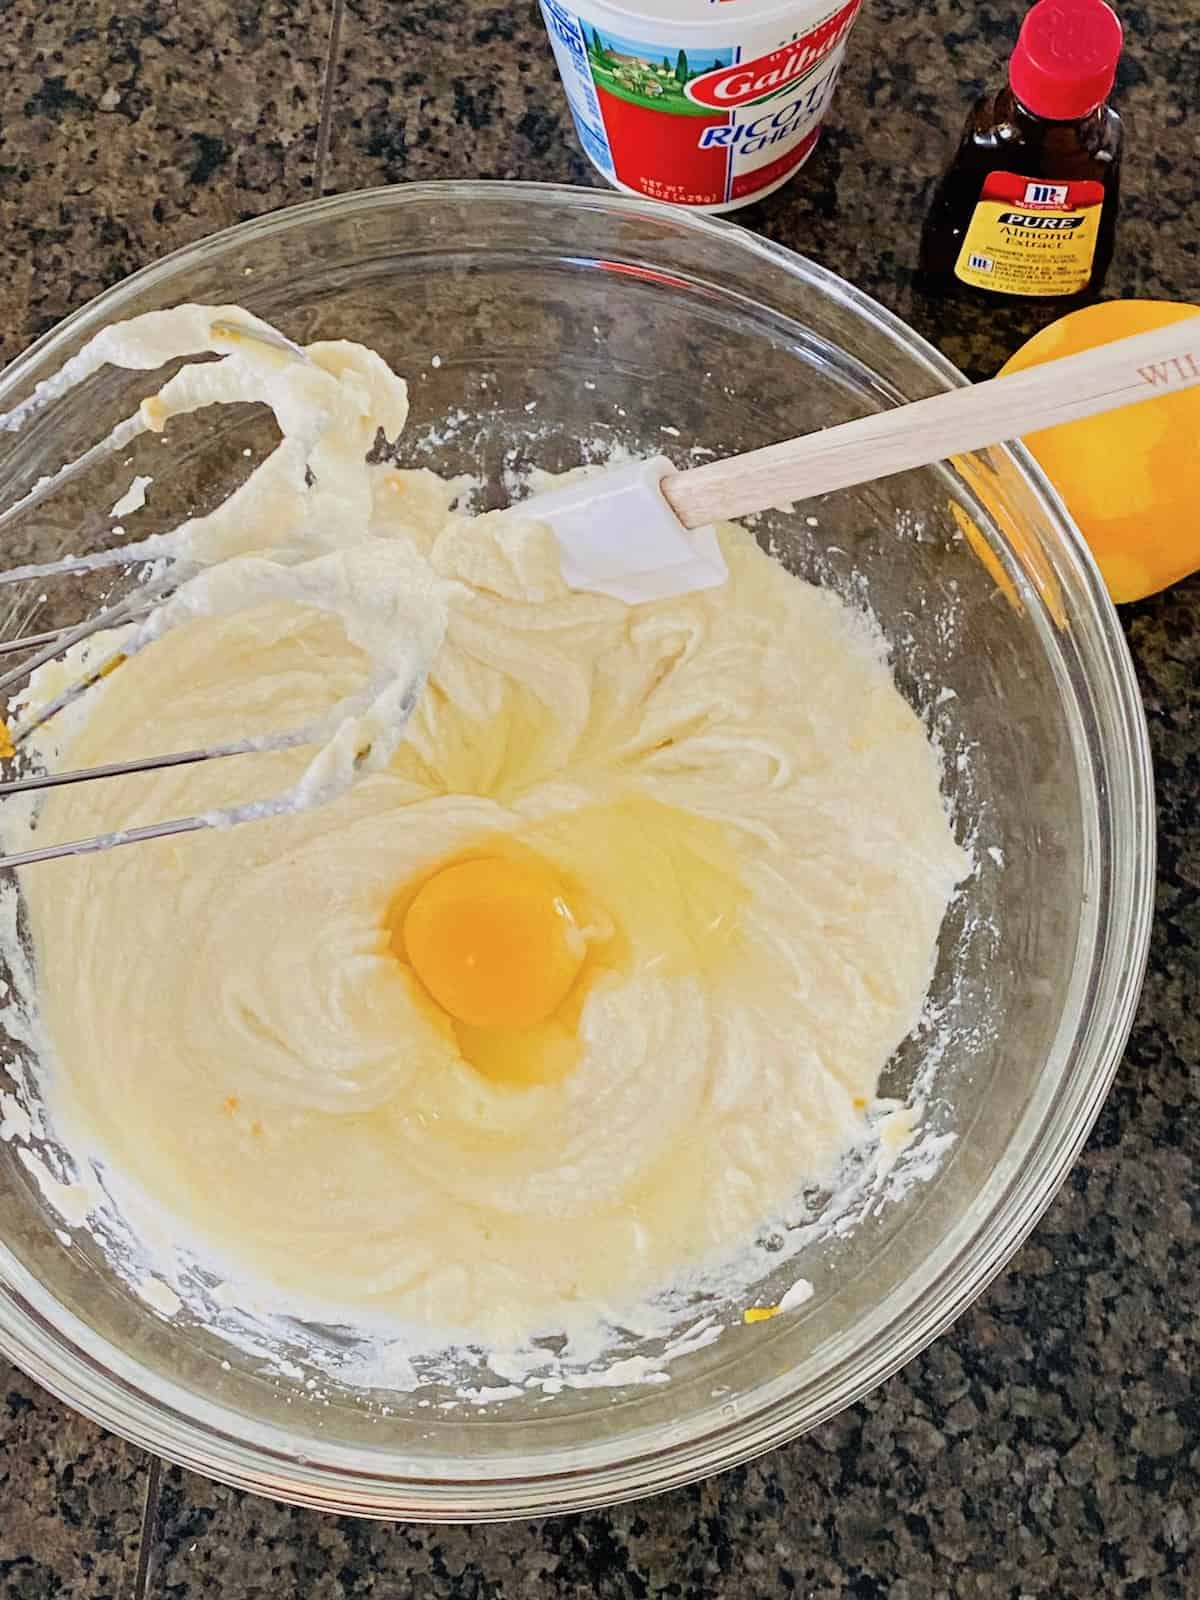 adding the egg to the other ingredients in the bowl.